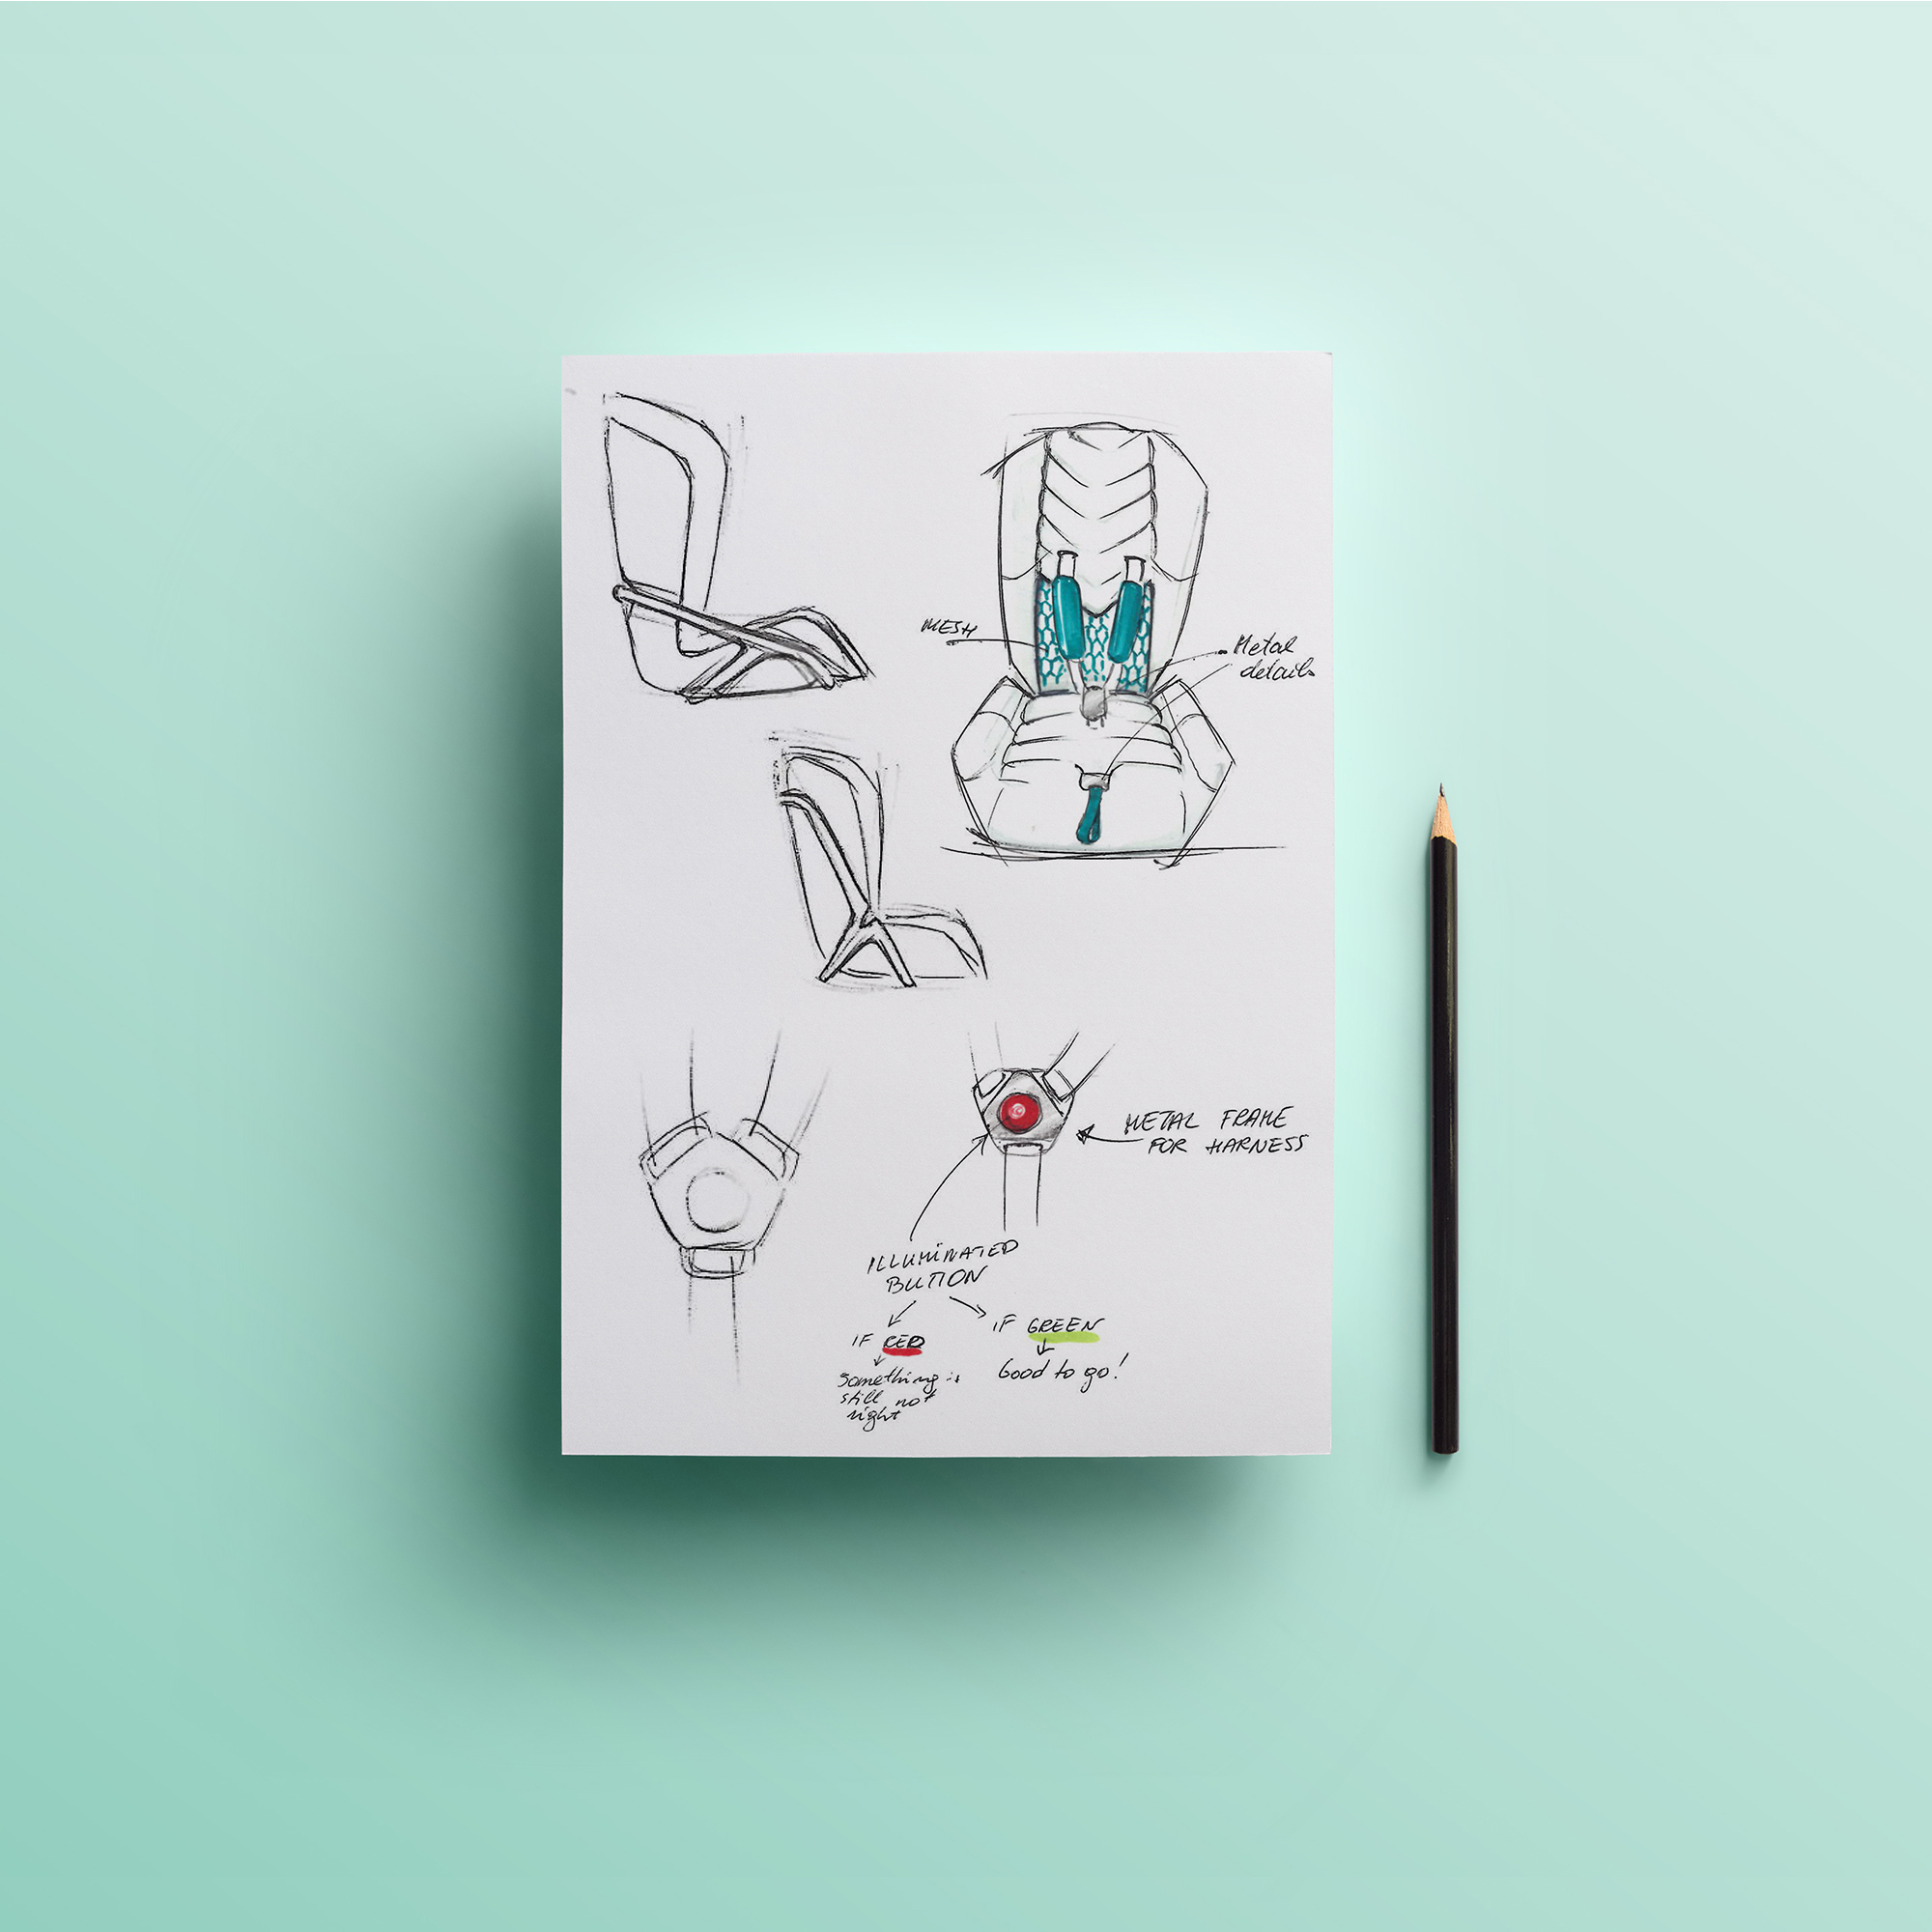 Industrial design sketches for smart baby cart seat design